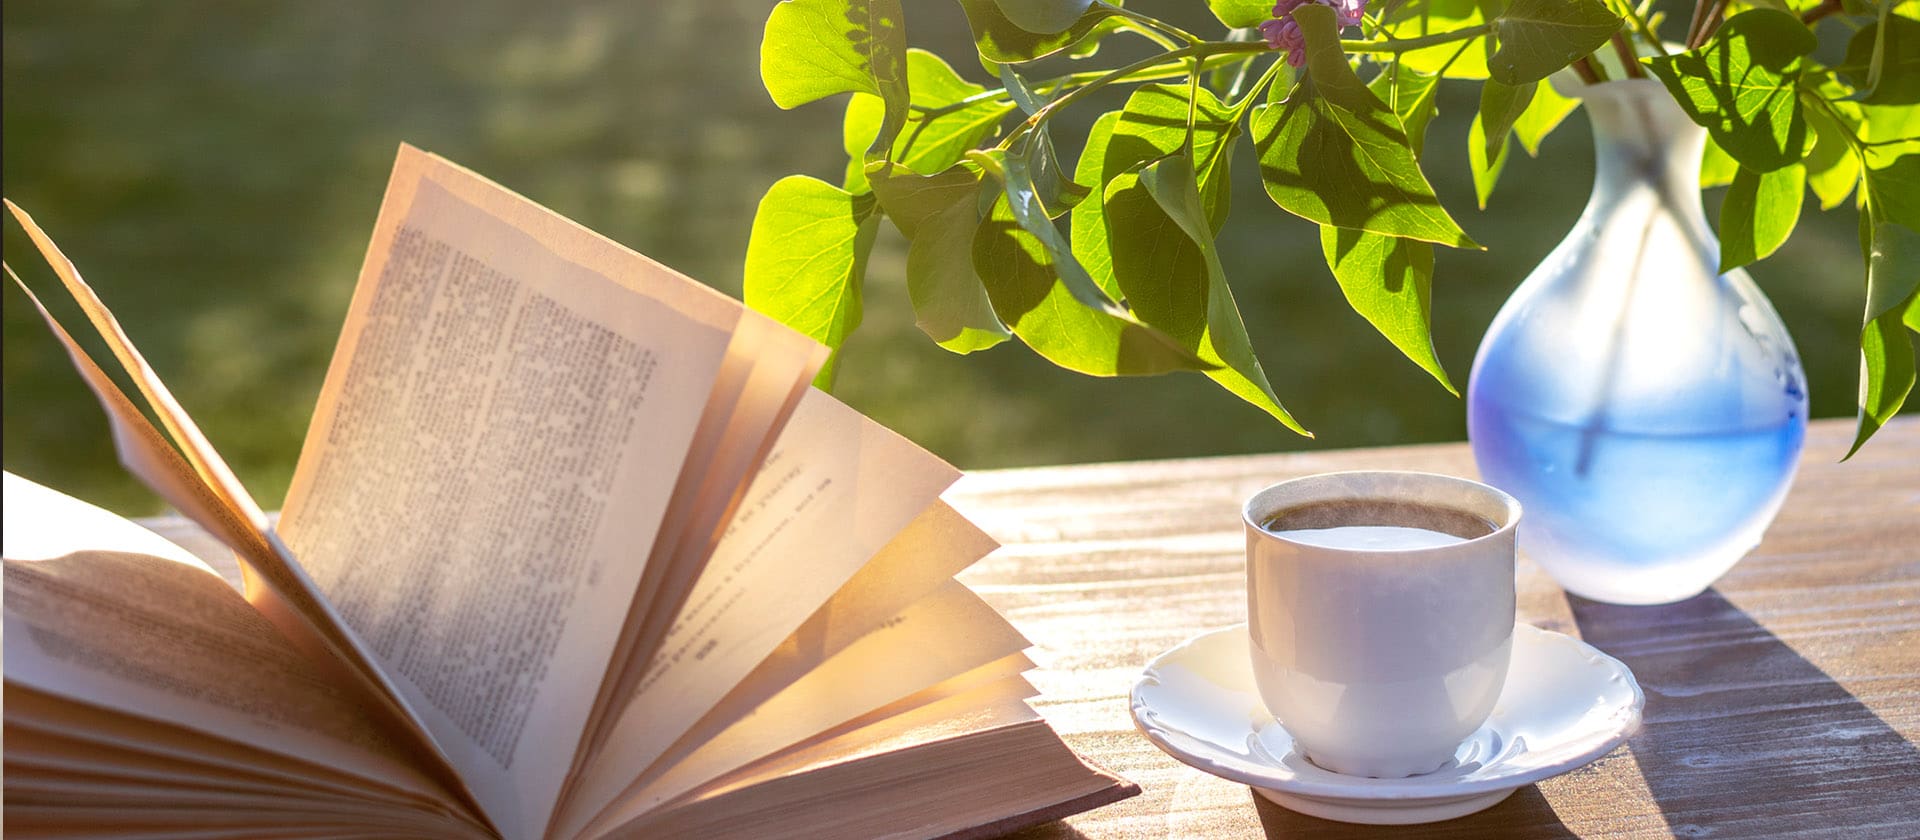 Book, coffee and vase on a table in a garden